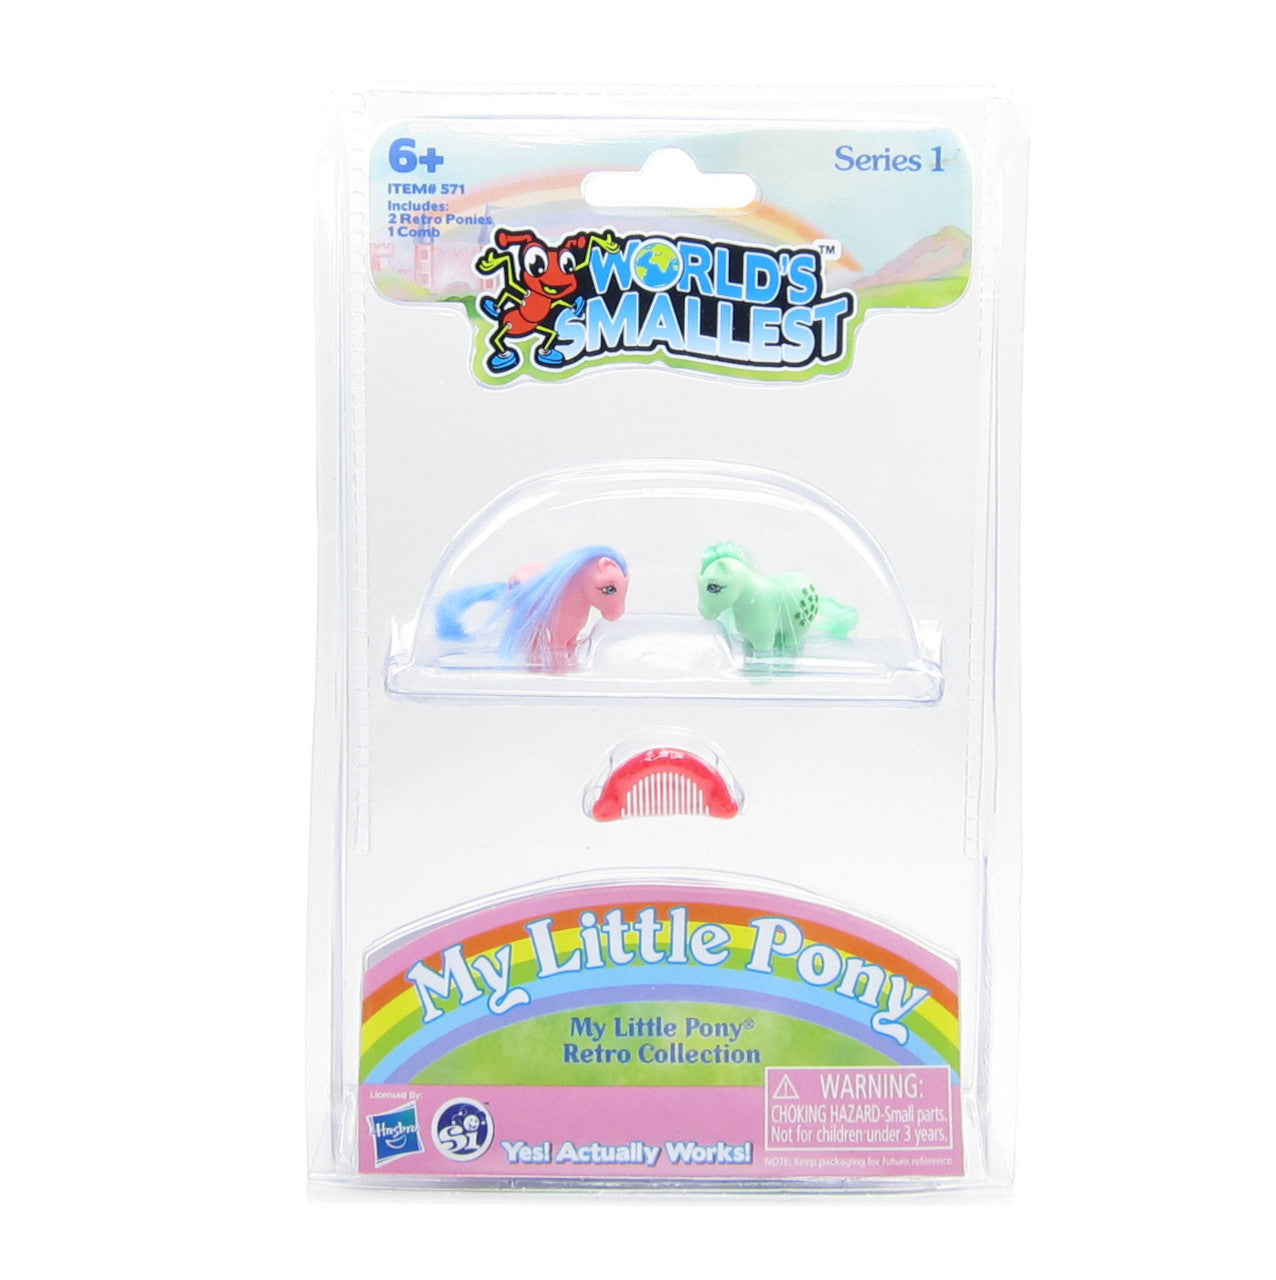 World's Smallest My Little Pony retro Firefly and Minty ponies with comb